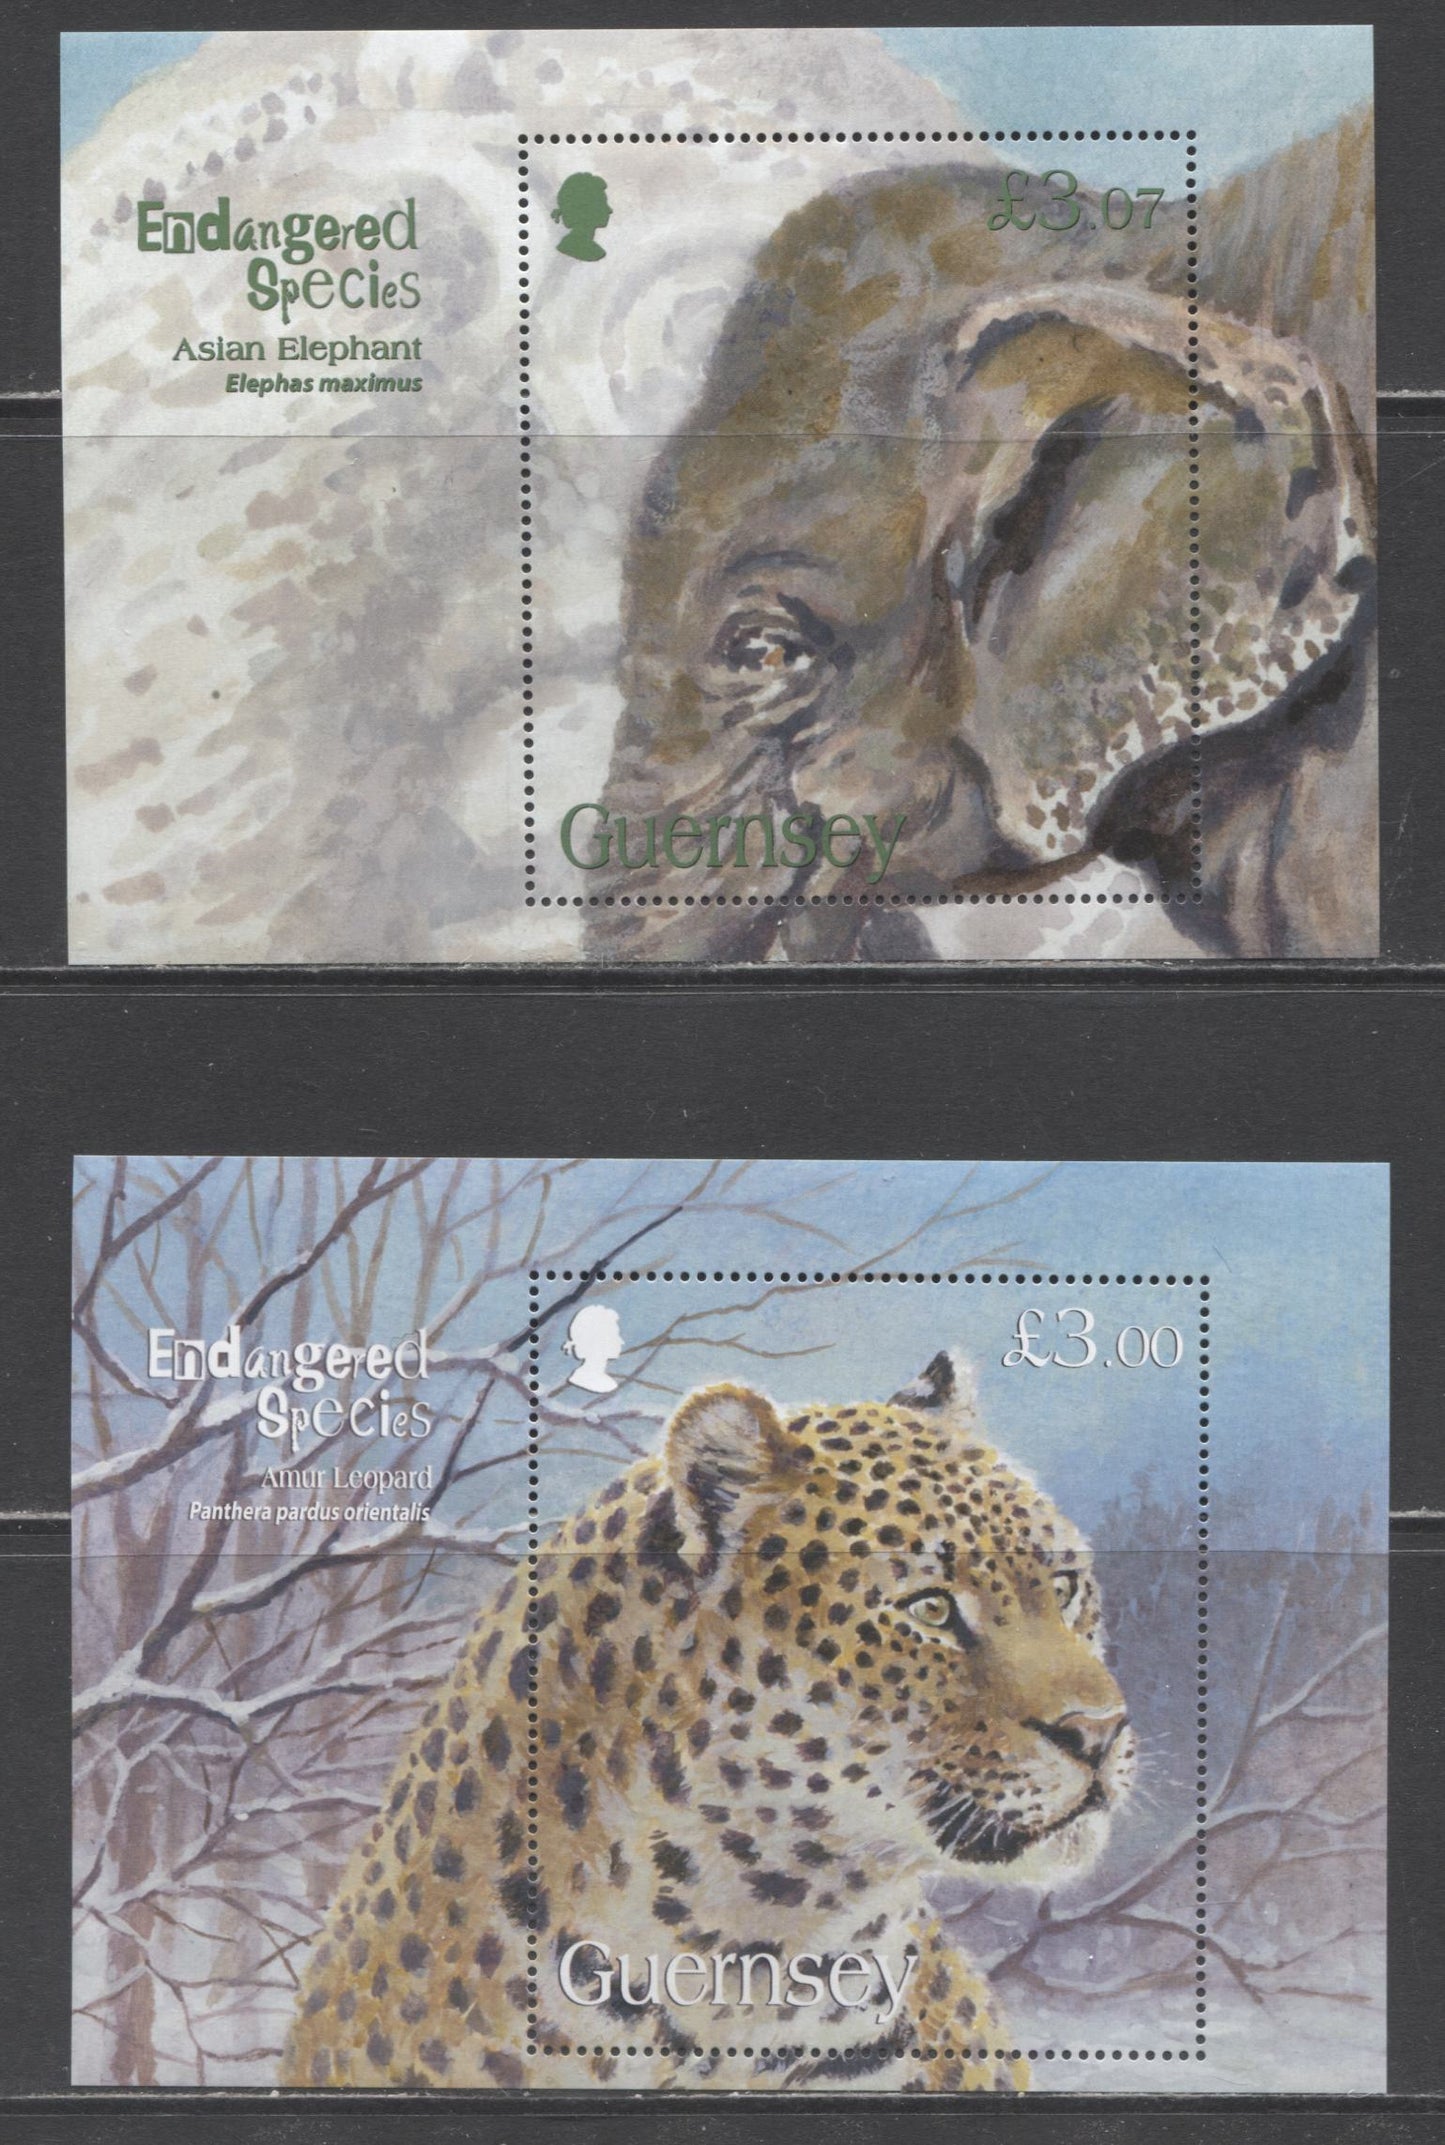 Lot 33 Great Britain - Guernsey SC#1028/1075 2009-2010 Endangered Species Issues, 2 VFNH Souvenir Sheets, Click on Listing to See ALL Pictures, 2017 Scott Cat. $17.25